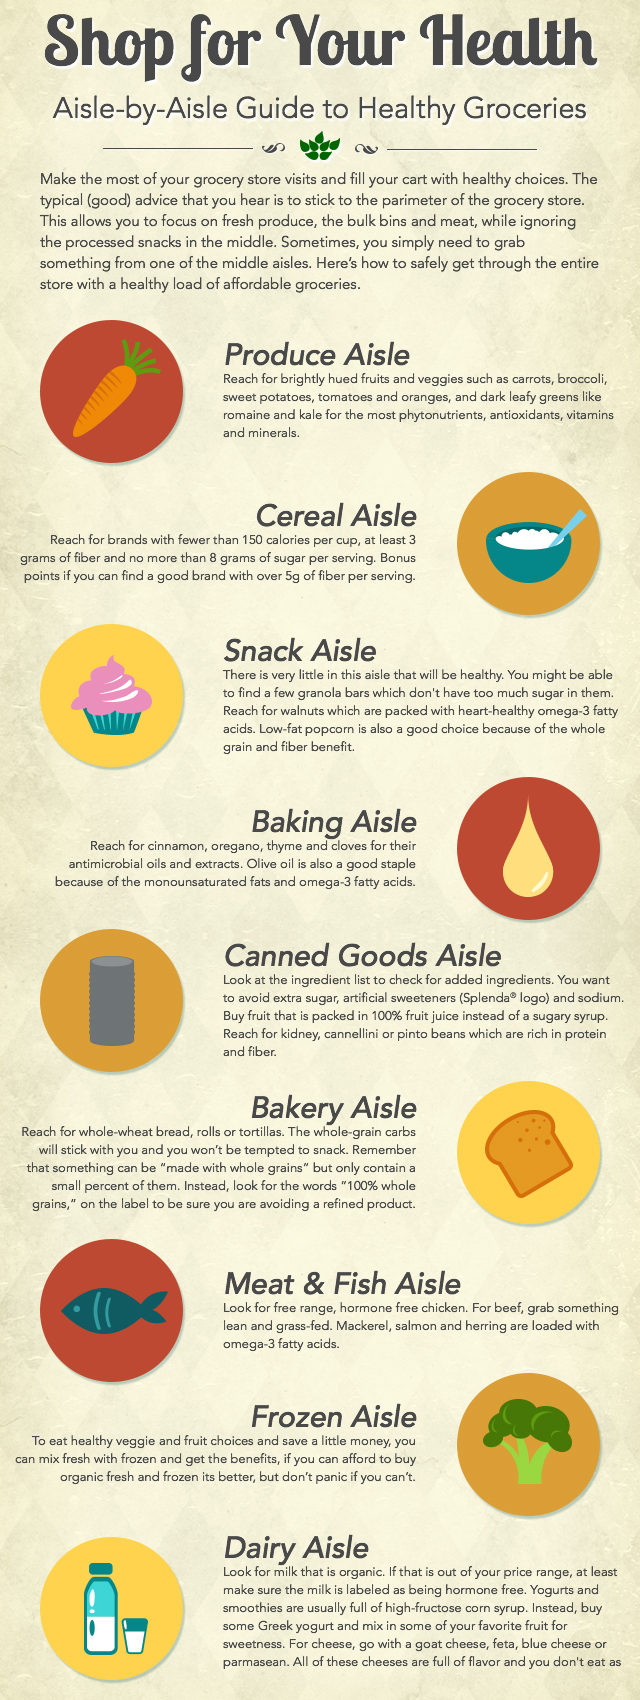 Aisle-by-Aisle Guide to Healthy Grocery Shopping